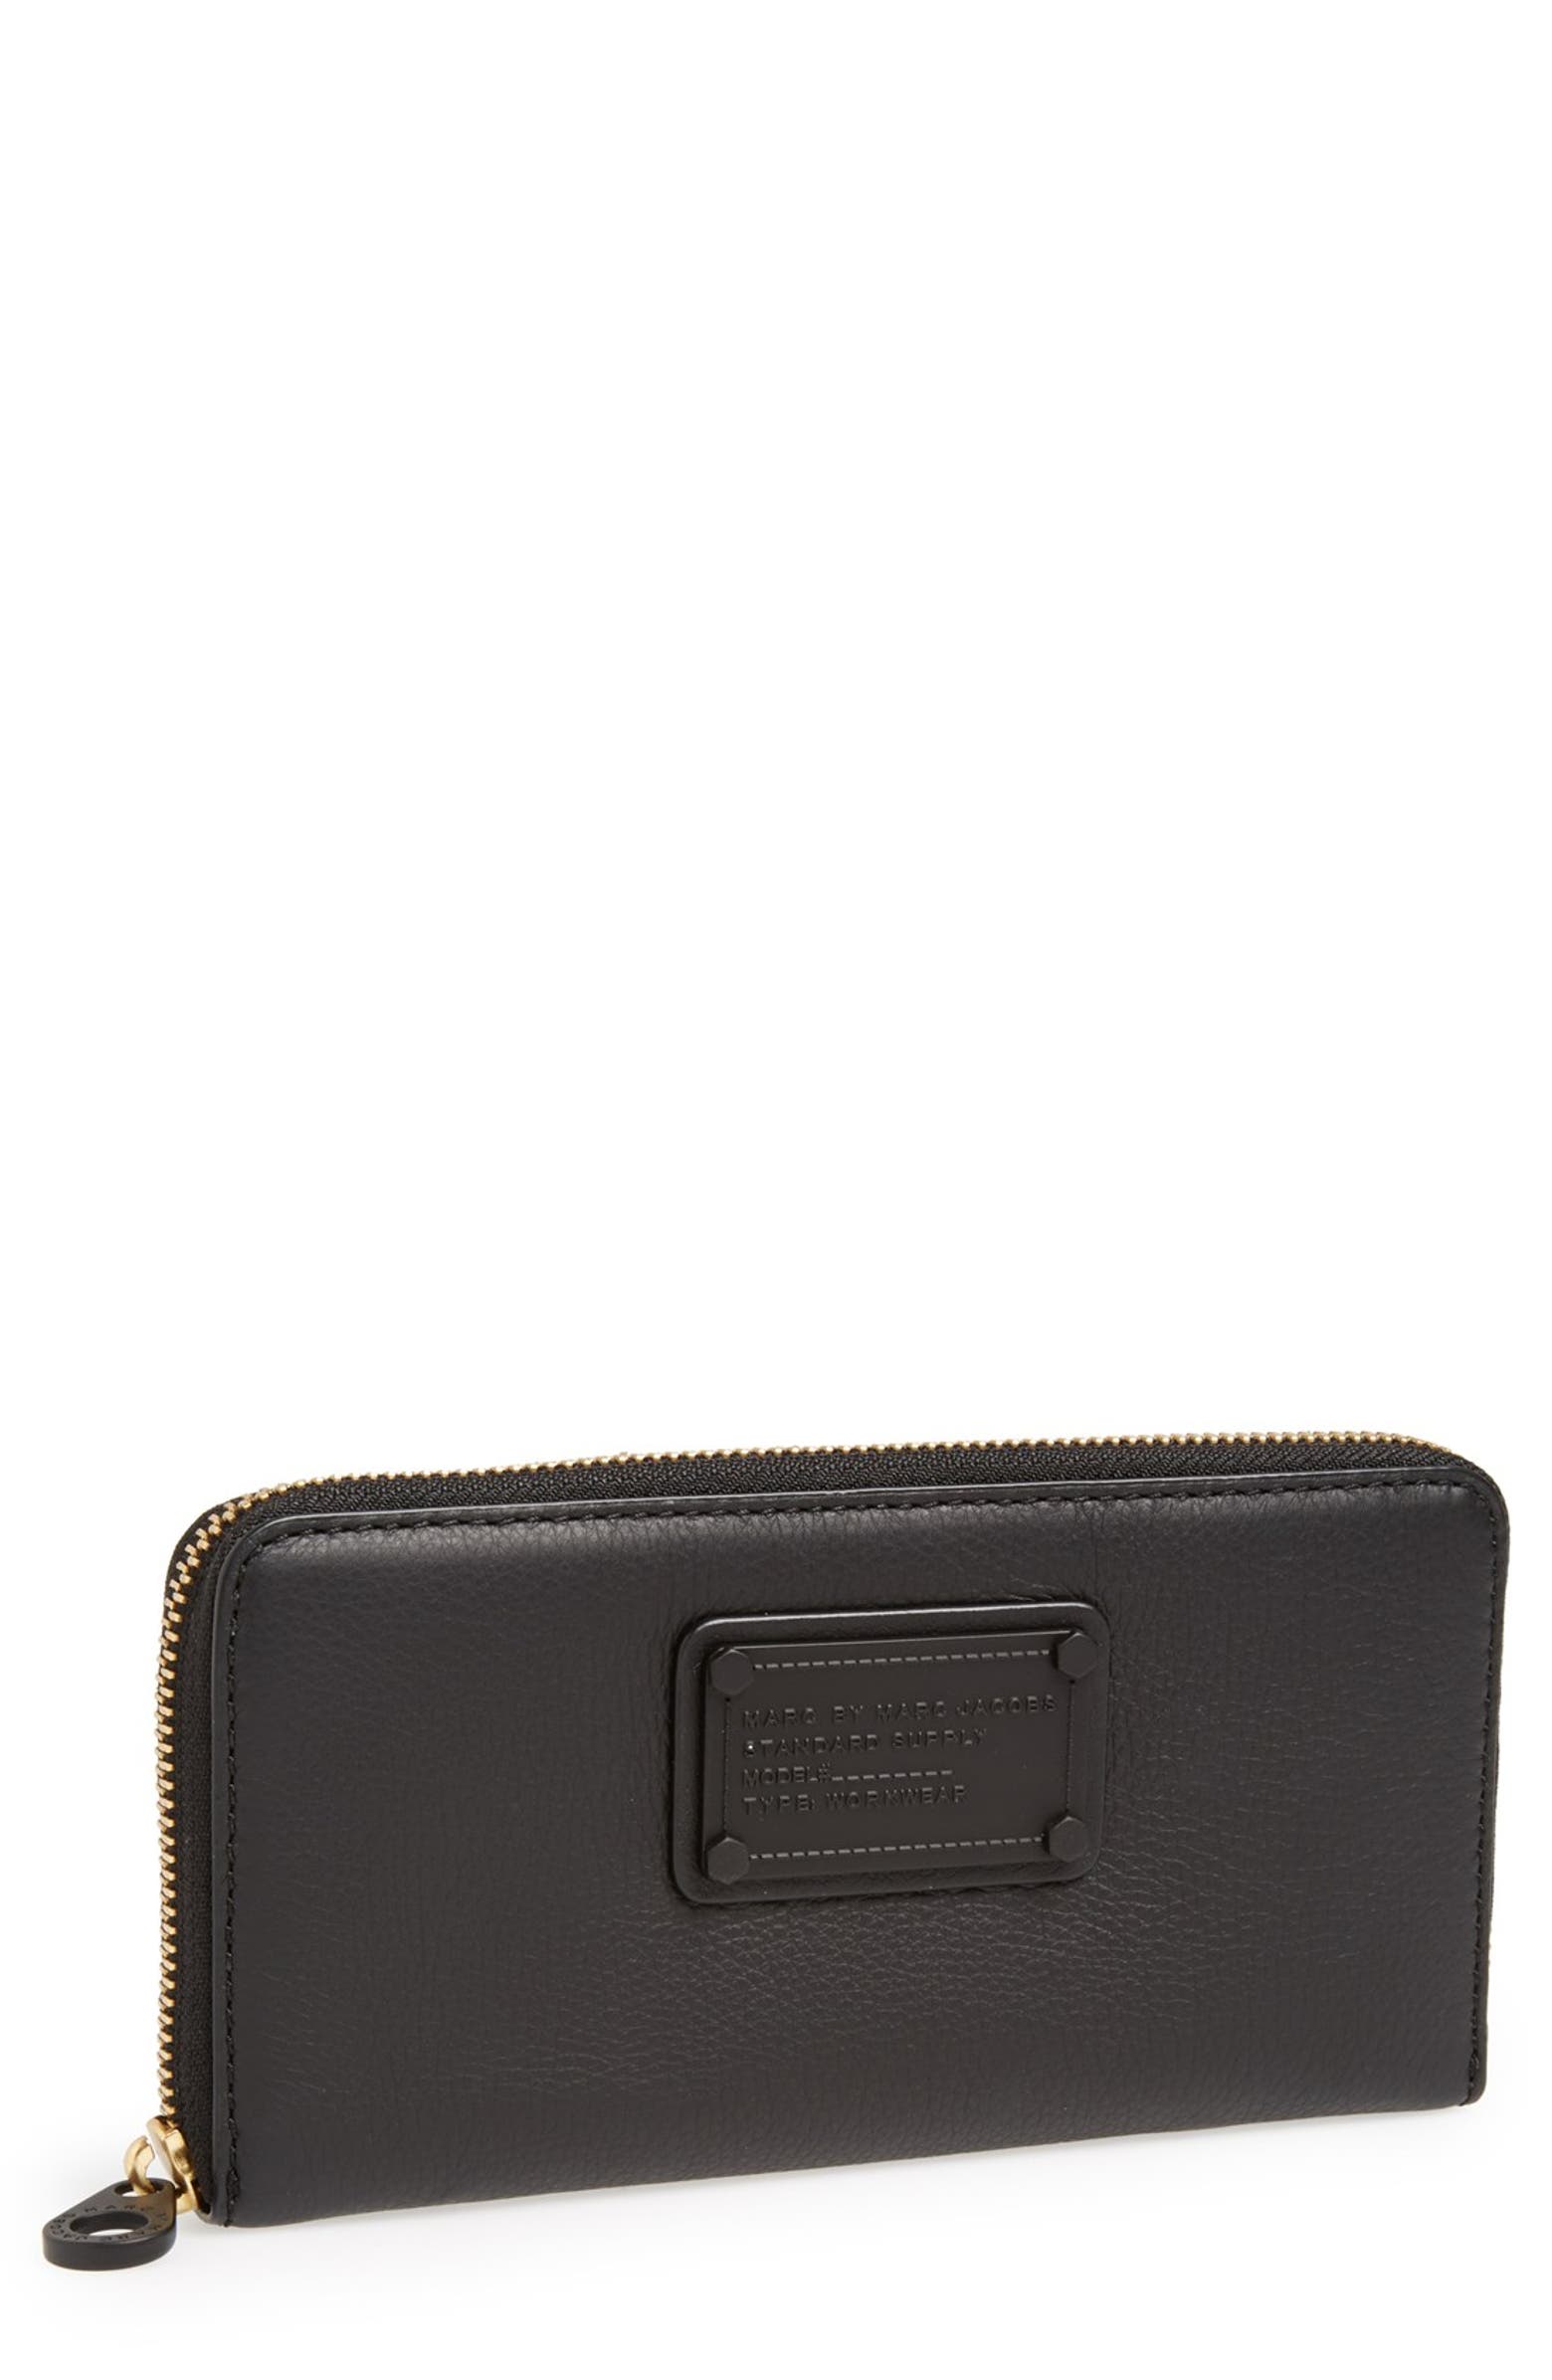 MARC BY MARC JACOBS 'Electro Q - Vertical Zippy' Wallet | Nordstrom